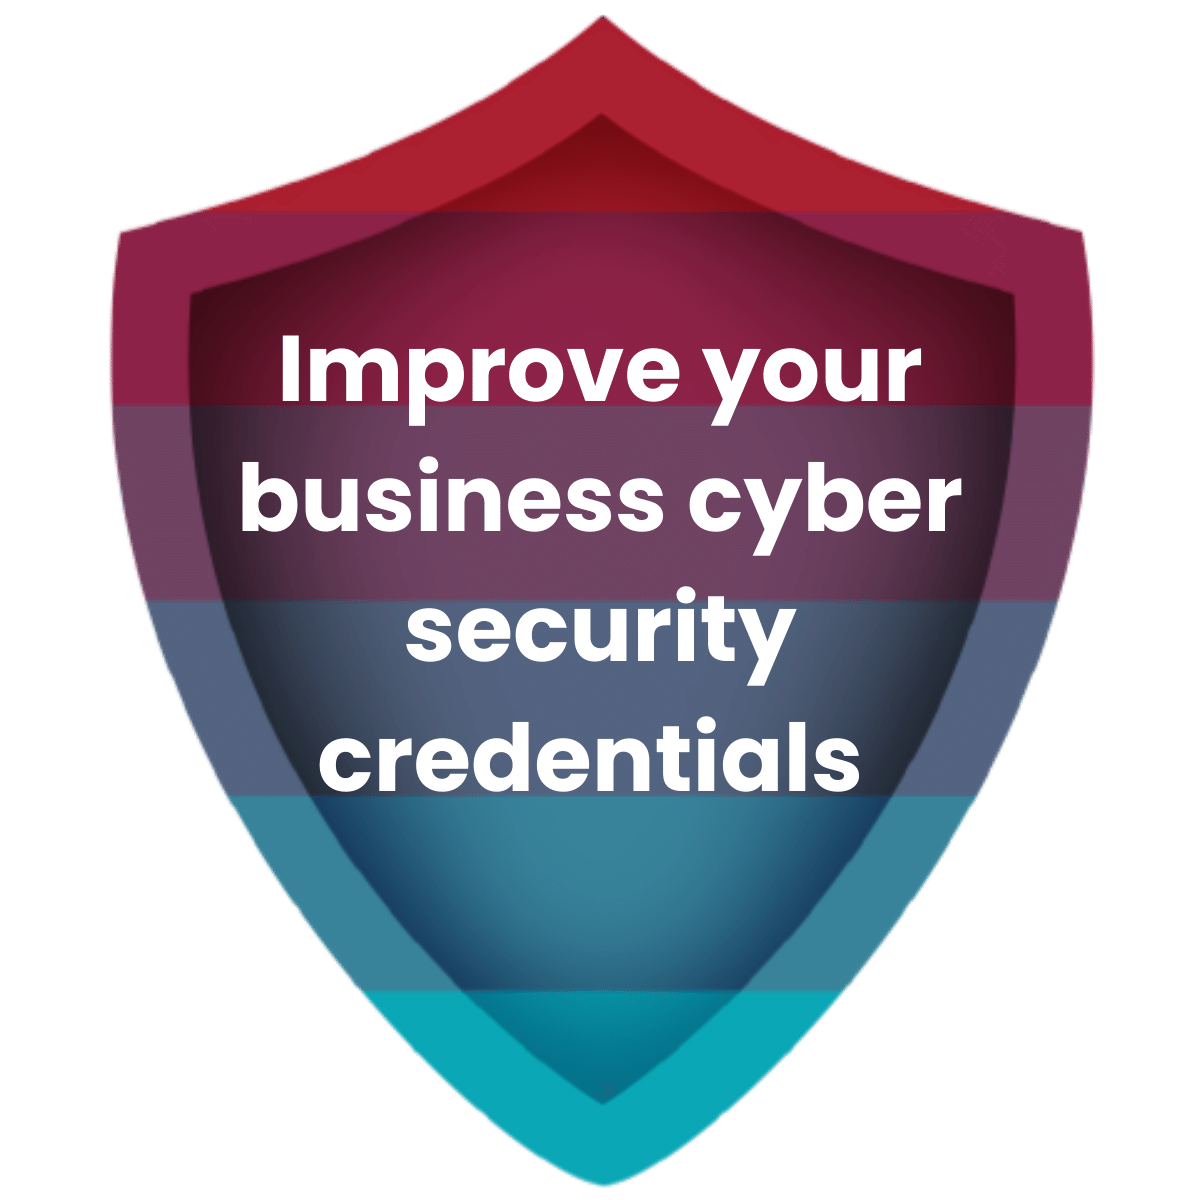 Shield graphic with Improve your business cyber security credentials message